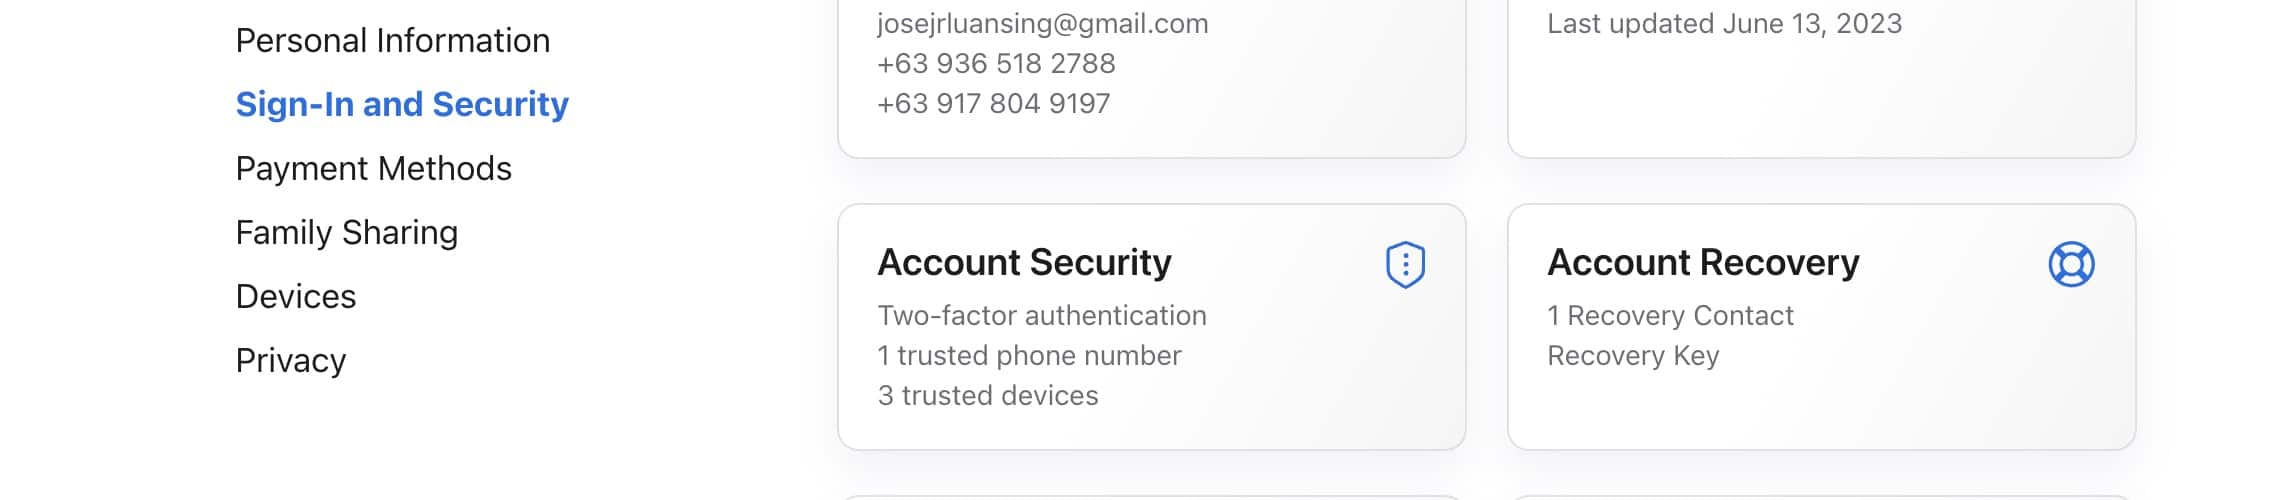 Sign-In and Security Section of Apple ID Website